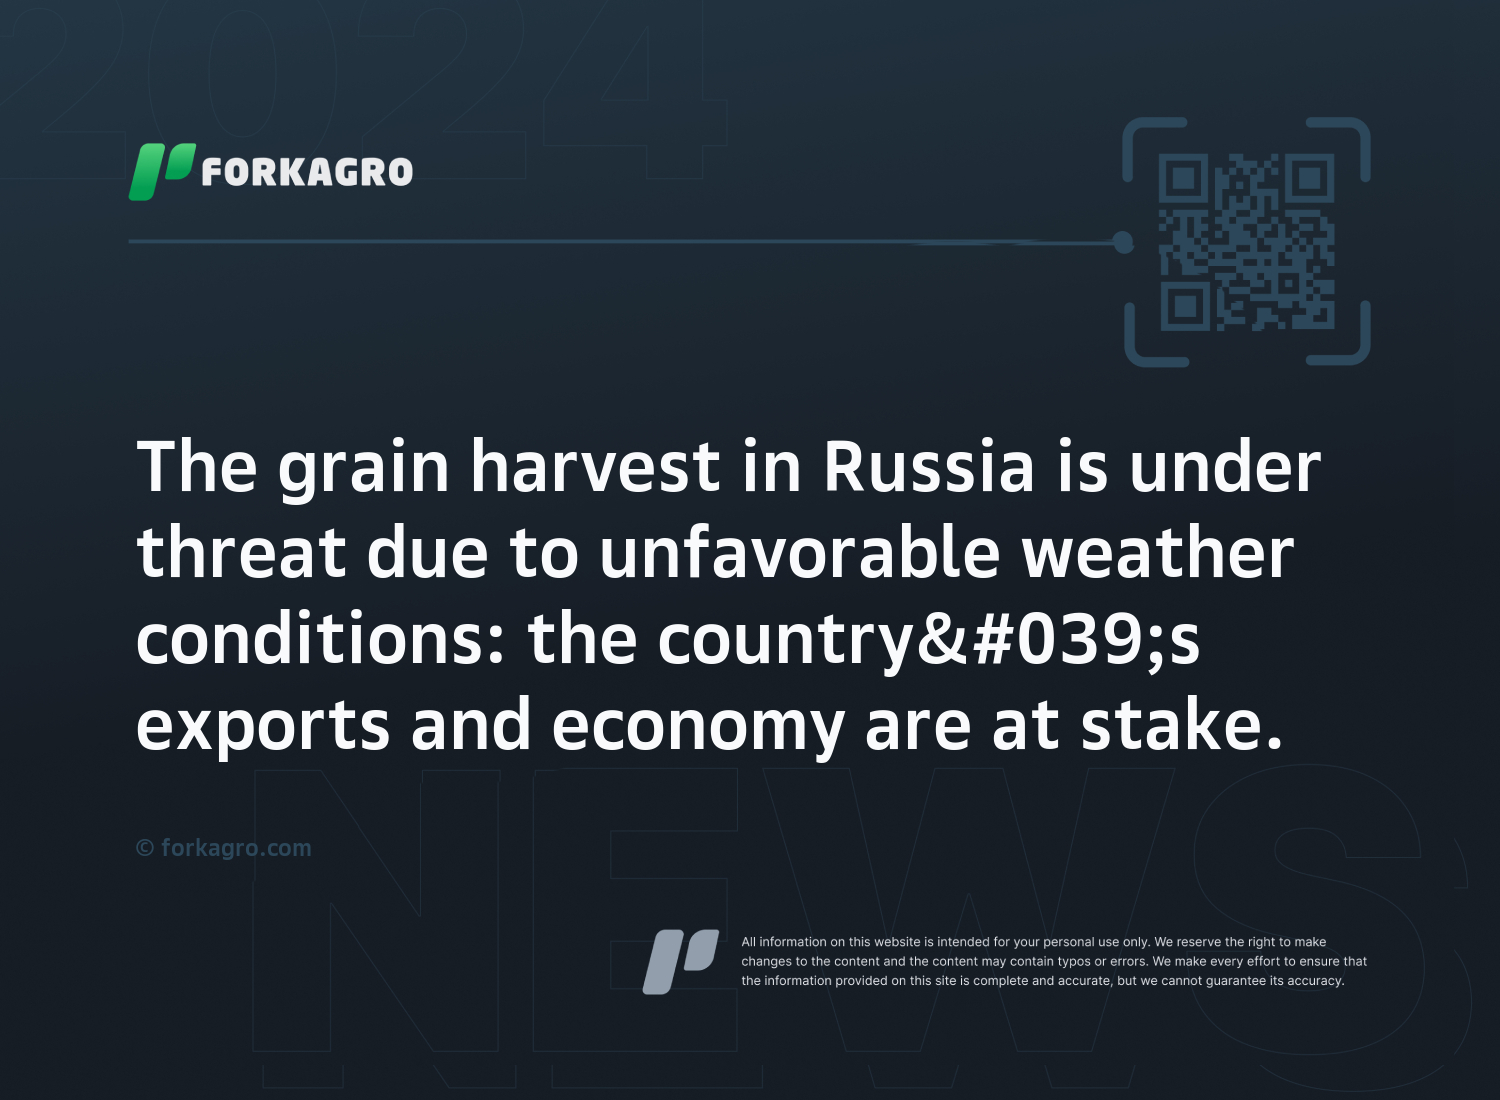 The grain harvest in Russia is under threat due to unfavorable weather conditions: the country's exports and economy are at stake.